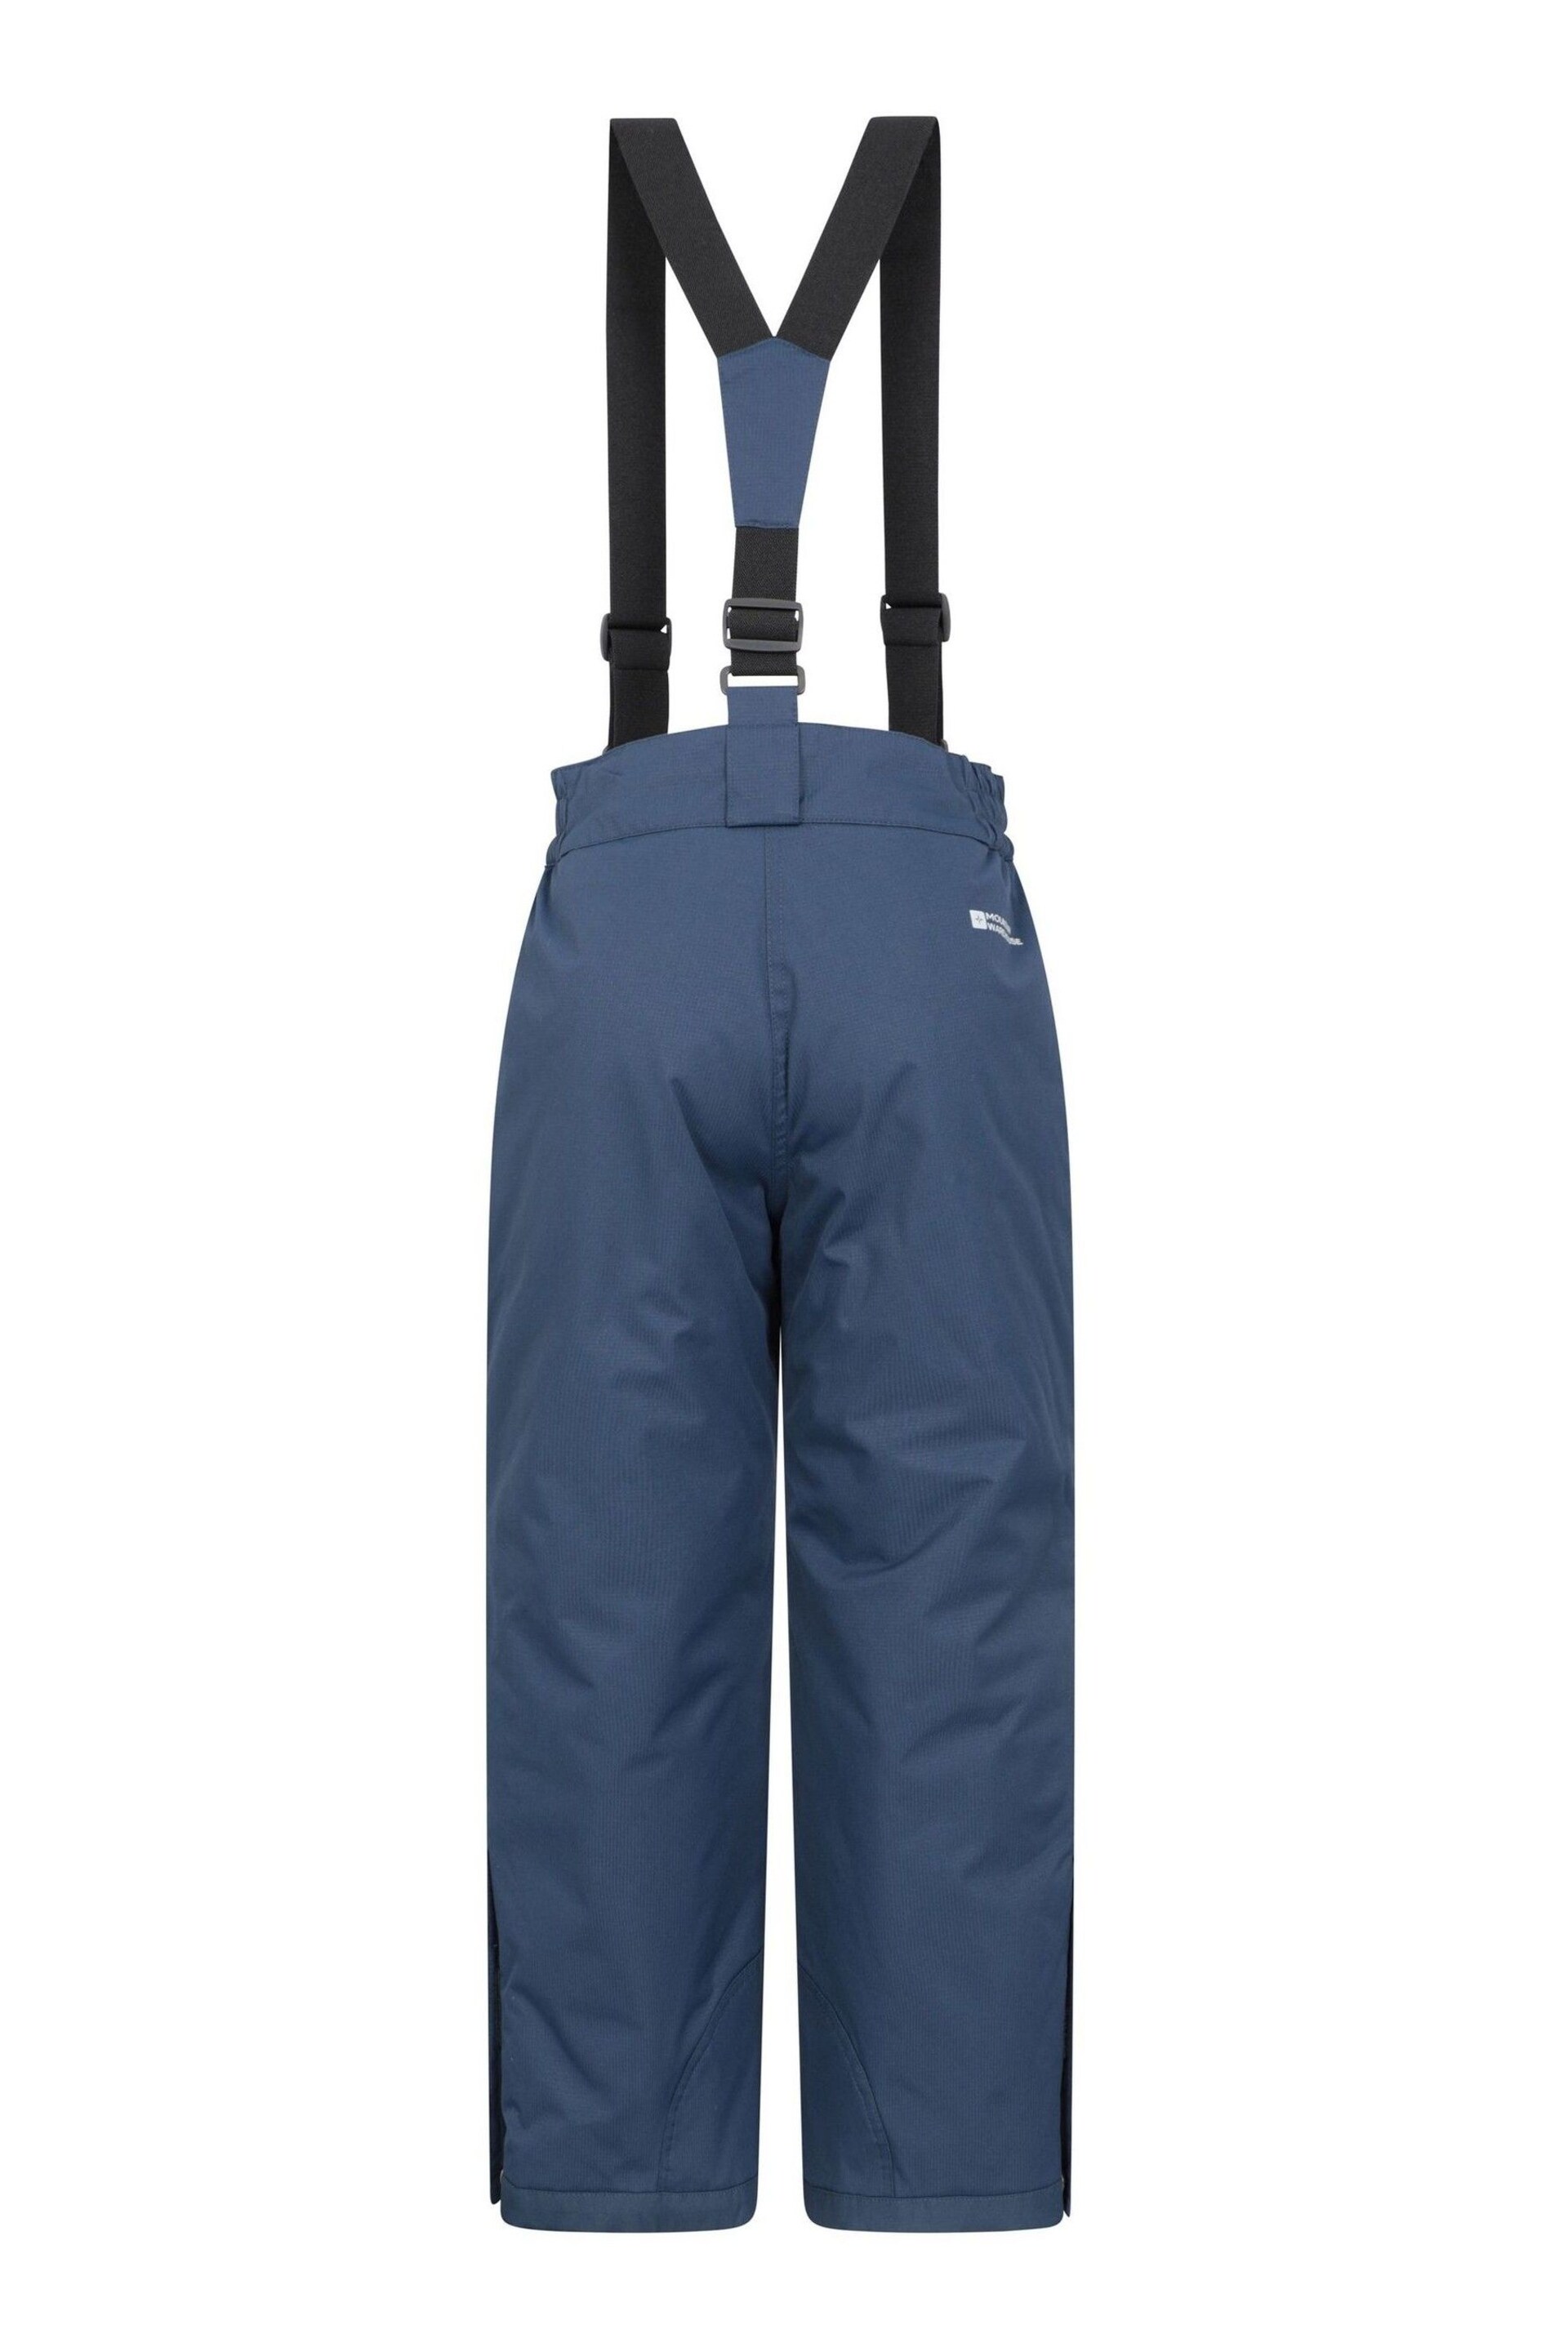 Mountain Warehouse Blue Raptor Kids Snow Trousers - Image 3 of 5